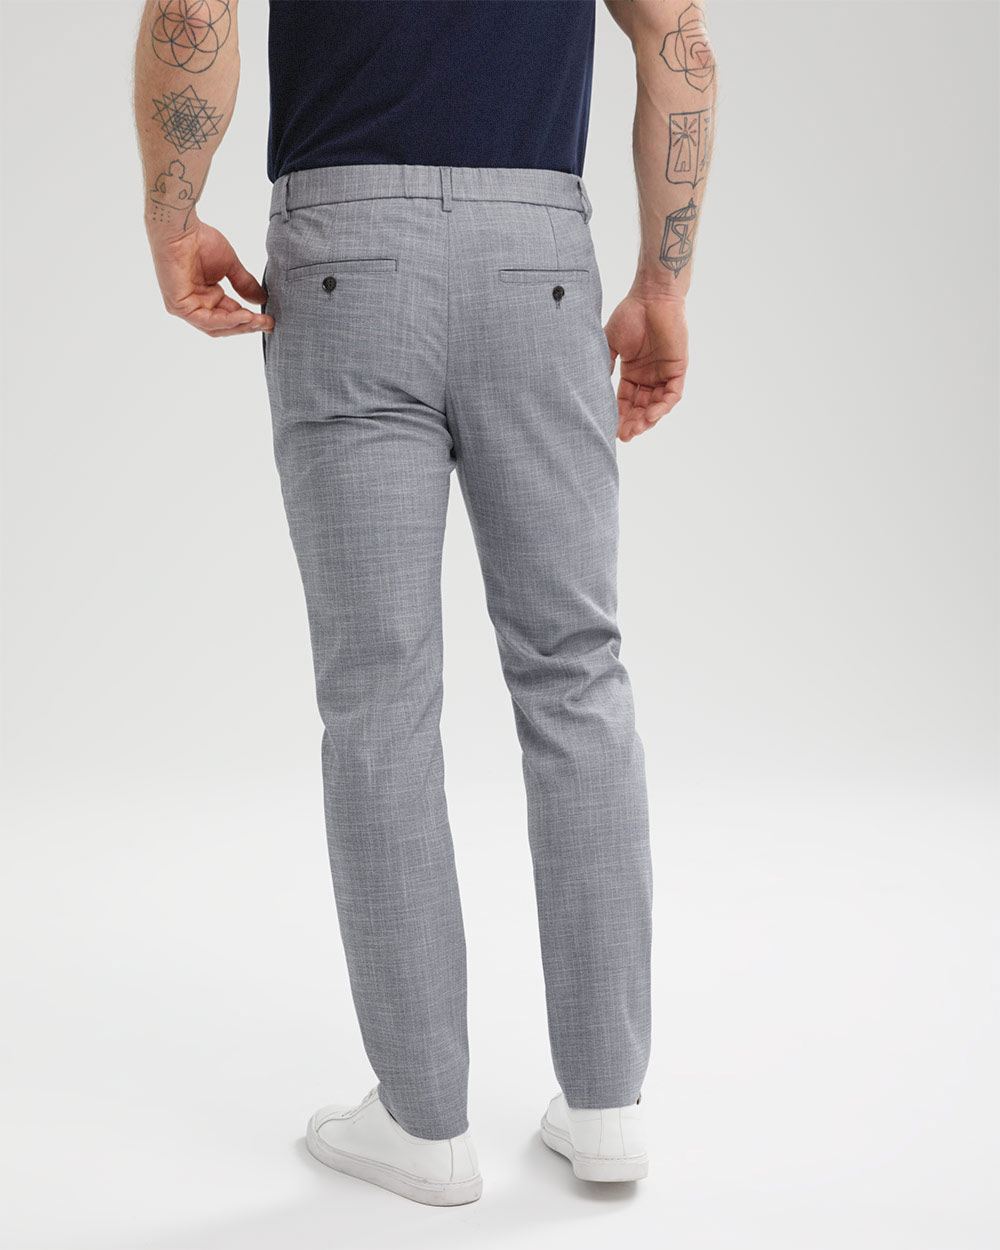 Slim Fit Chambray Easy Pant | RW&CO.